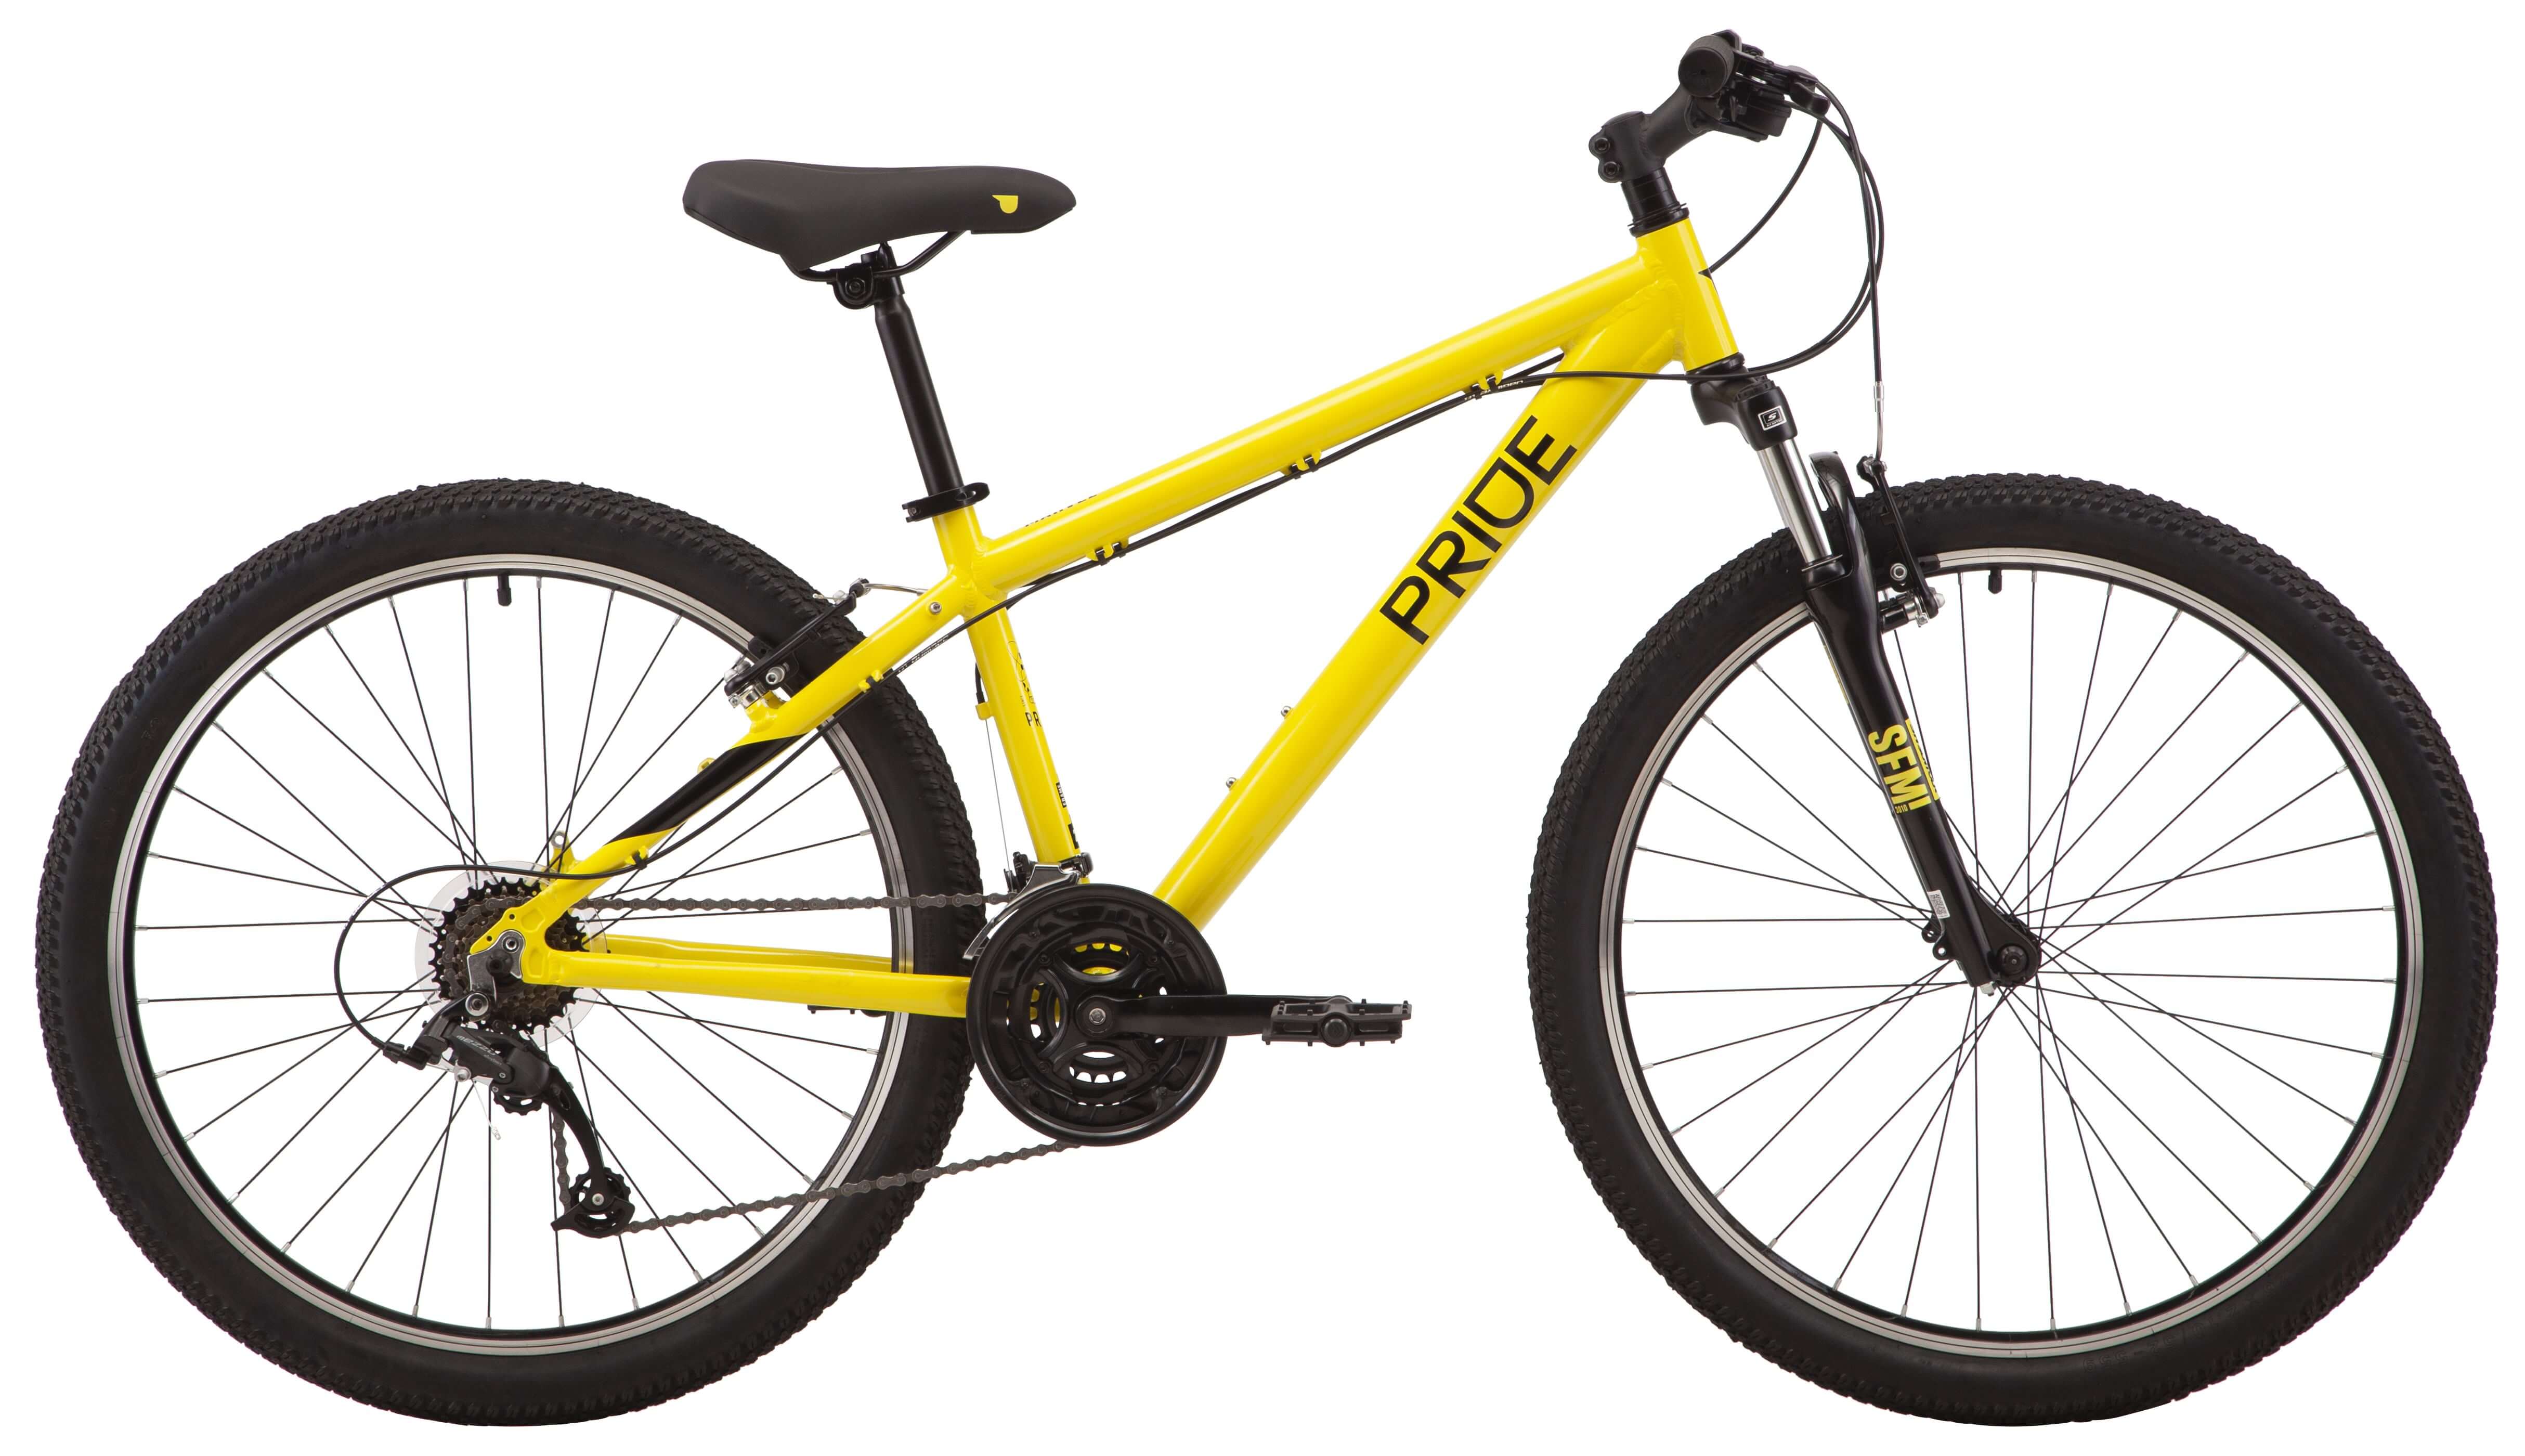 26" Pride Marvel 6.1 Frame - S 2022 Yellow (rear and front switches and tamnet - Microshift) Photo